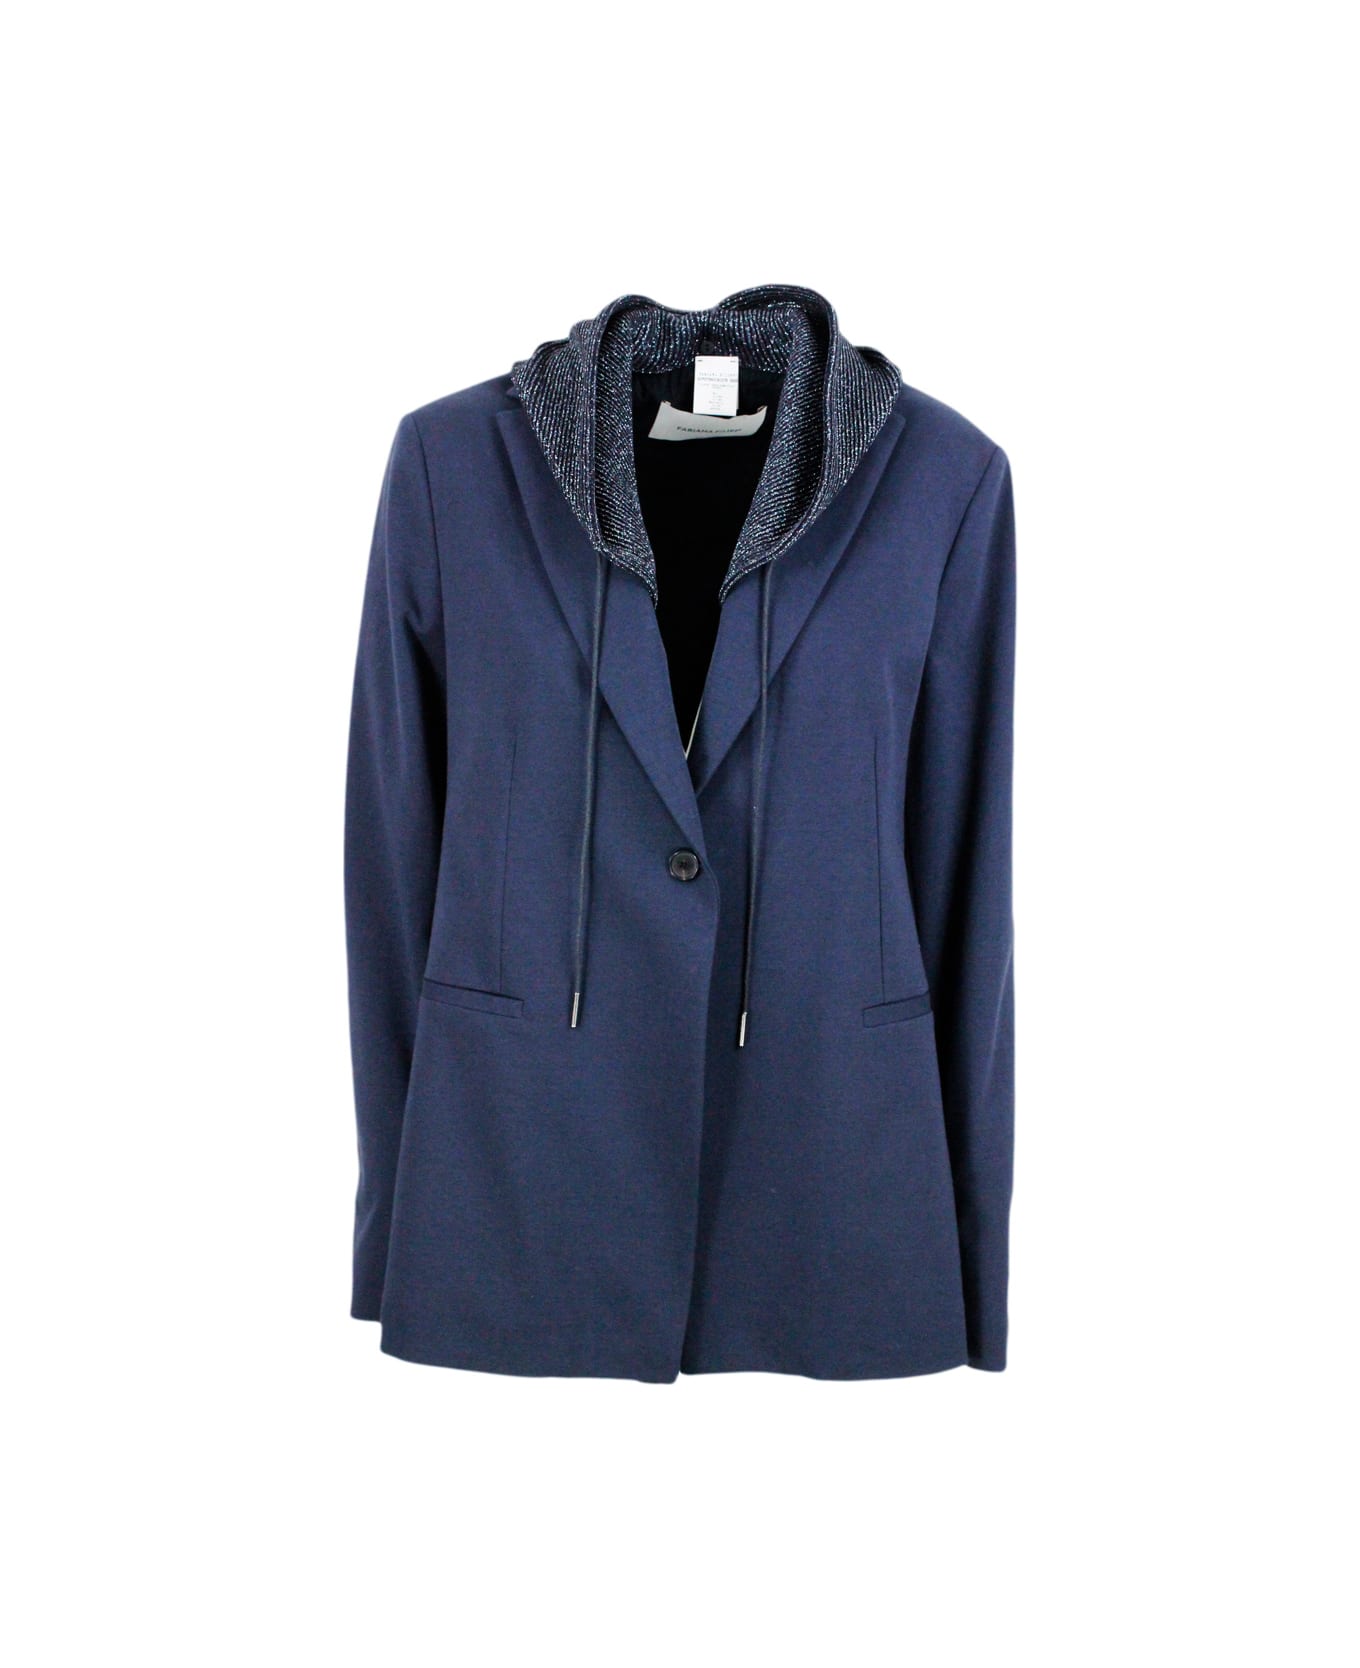 Fabiana Filippi Single-breasted Blazer Jacket In Stretch Cotton Jersey With Long Sleeves And Removable Hood Embellished With Lurex - Blu